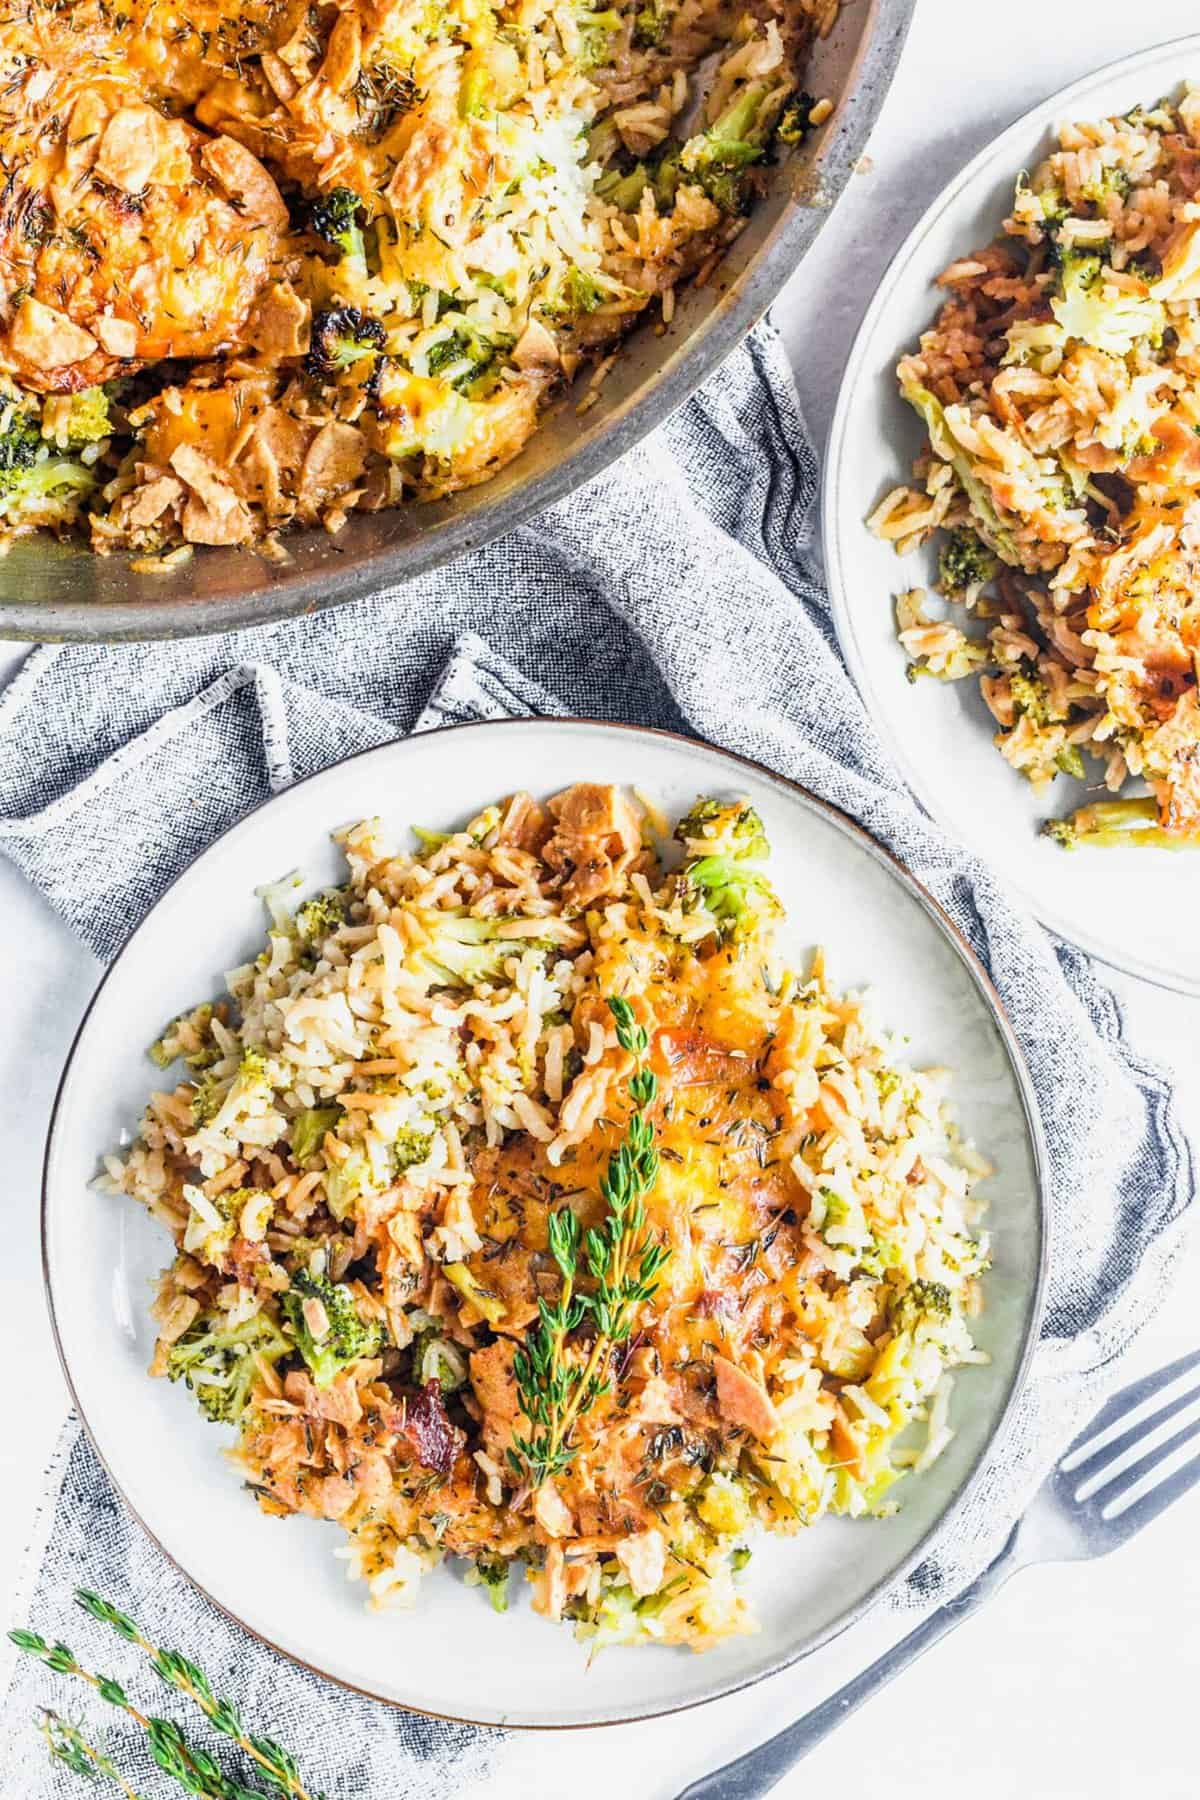 Two plates and a skillet of cheesy broccoli, rice, and chicken